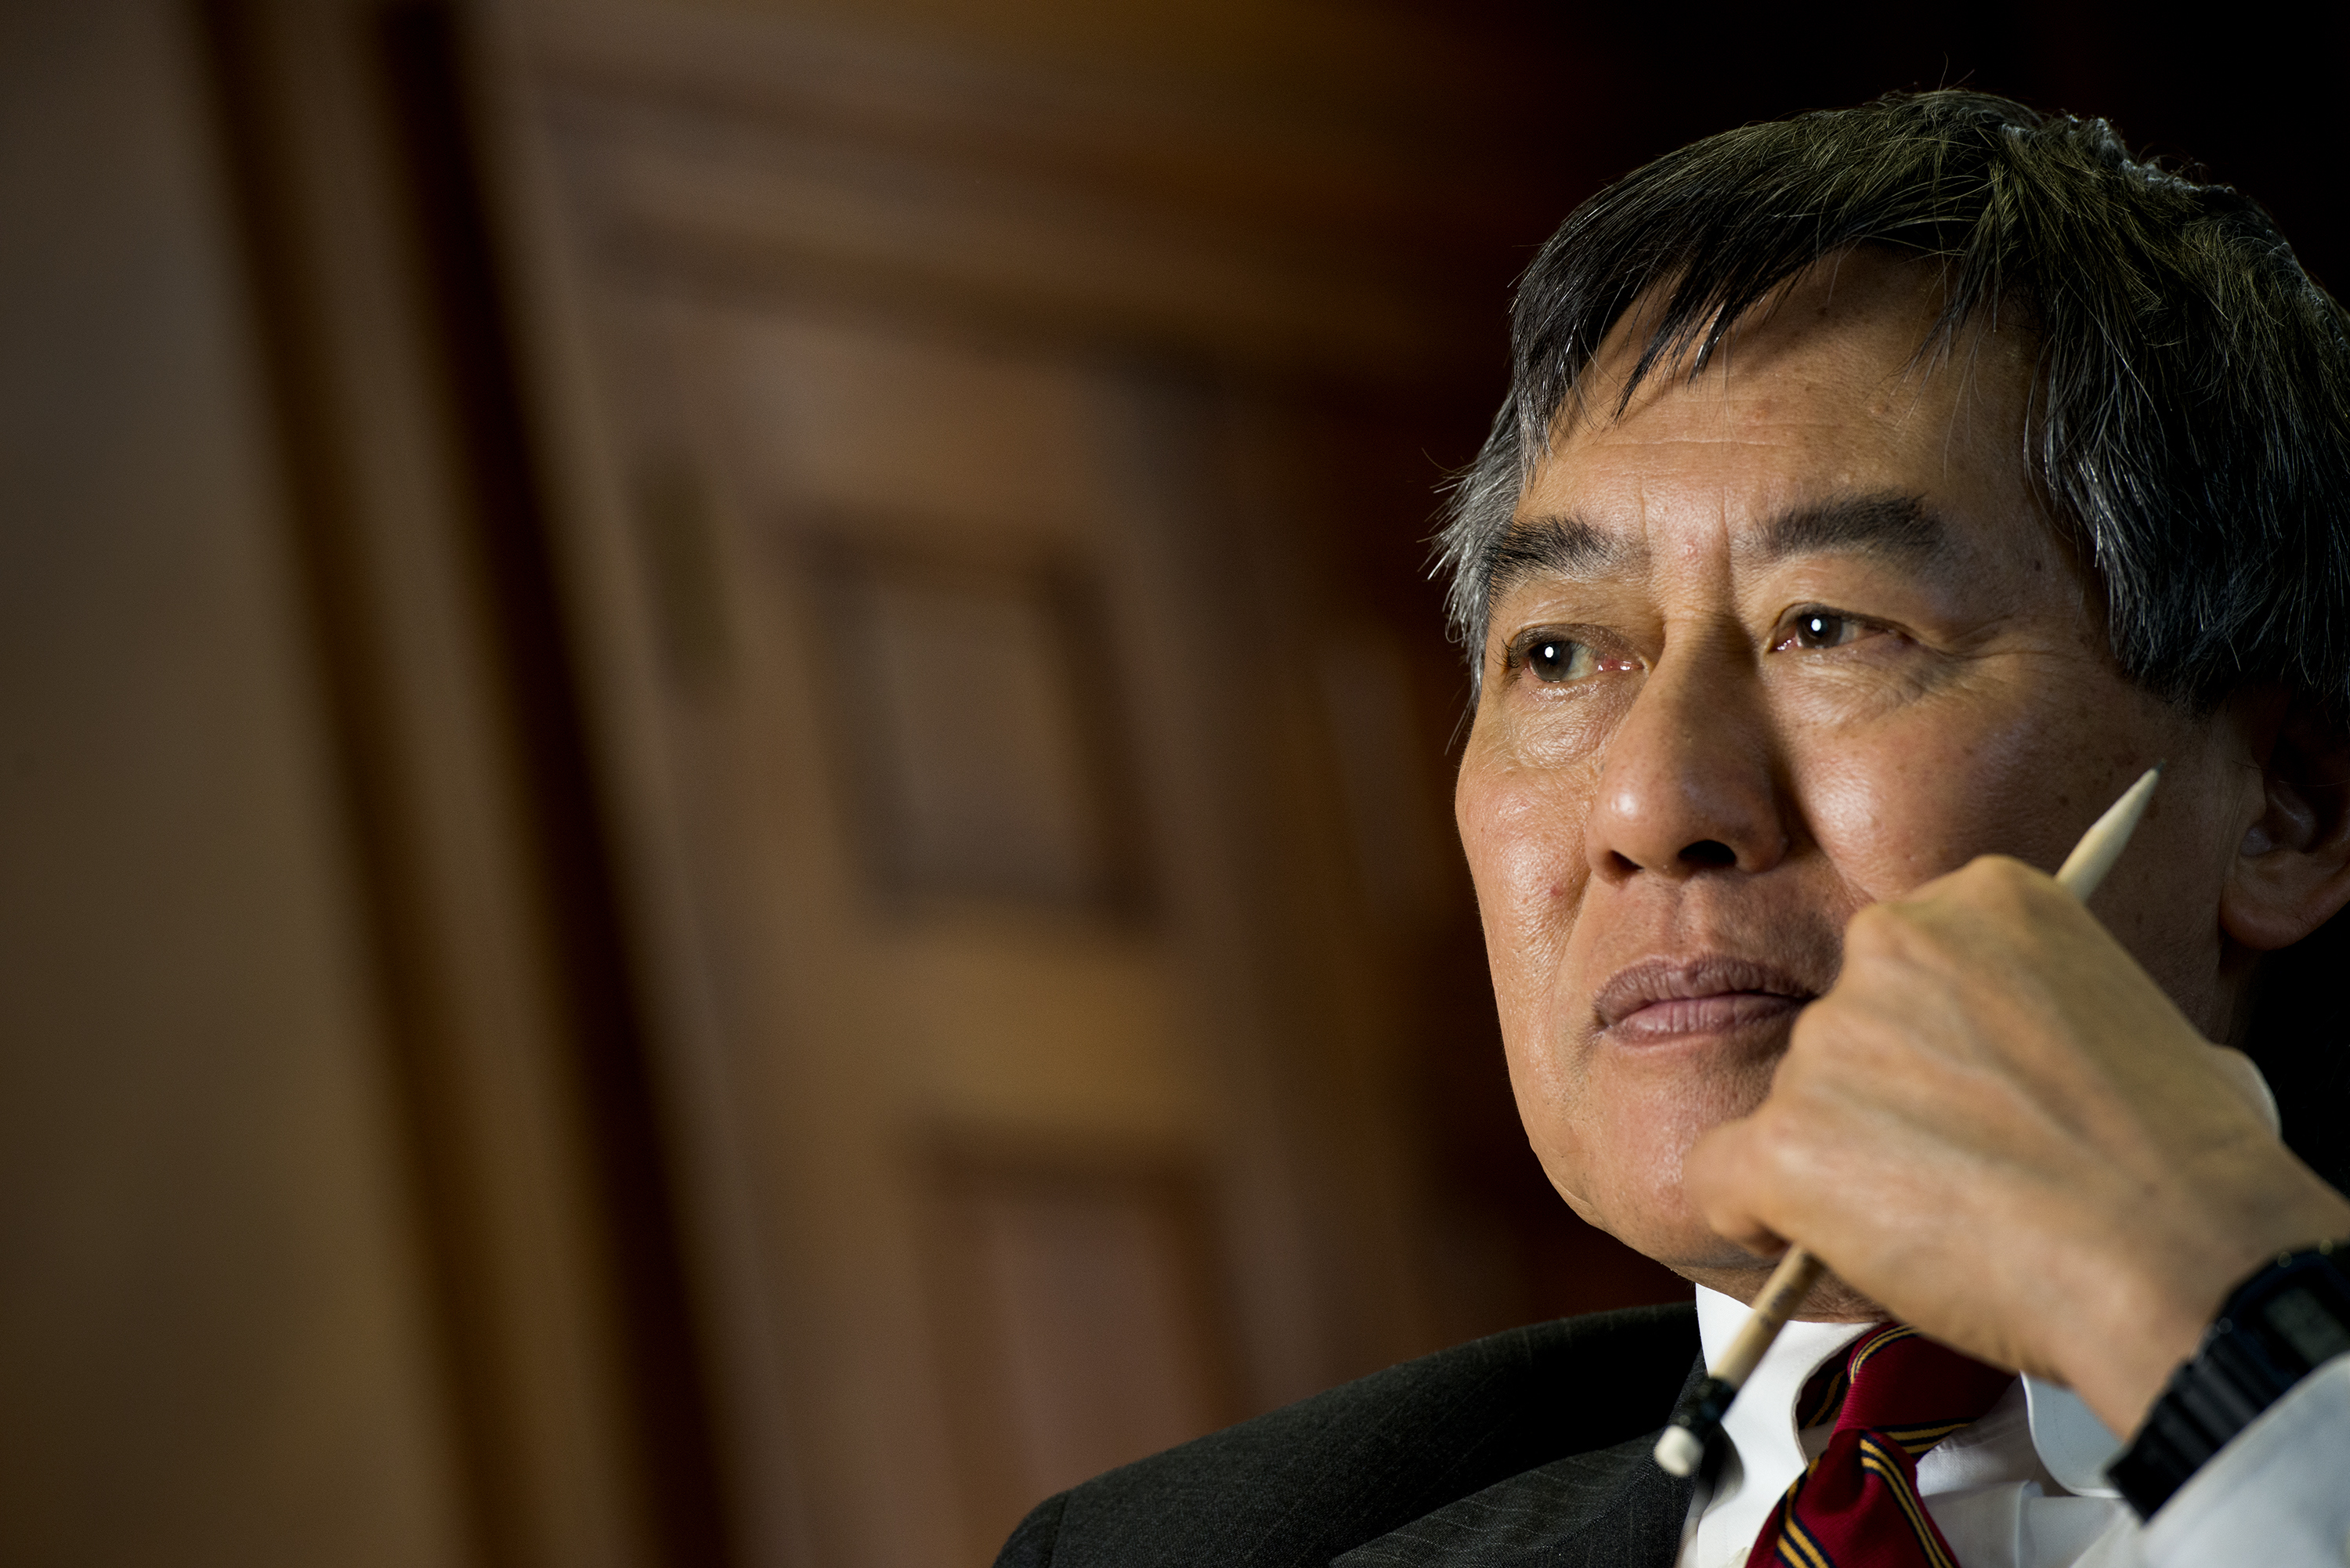 University of Maryland President Wallace Loh in College Park, MD on April 10, 2014.